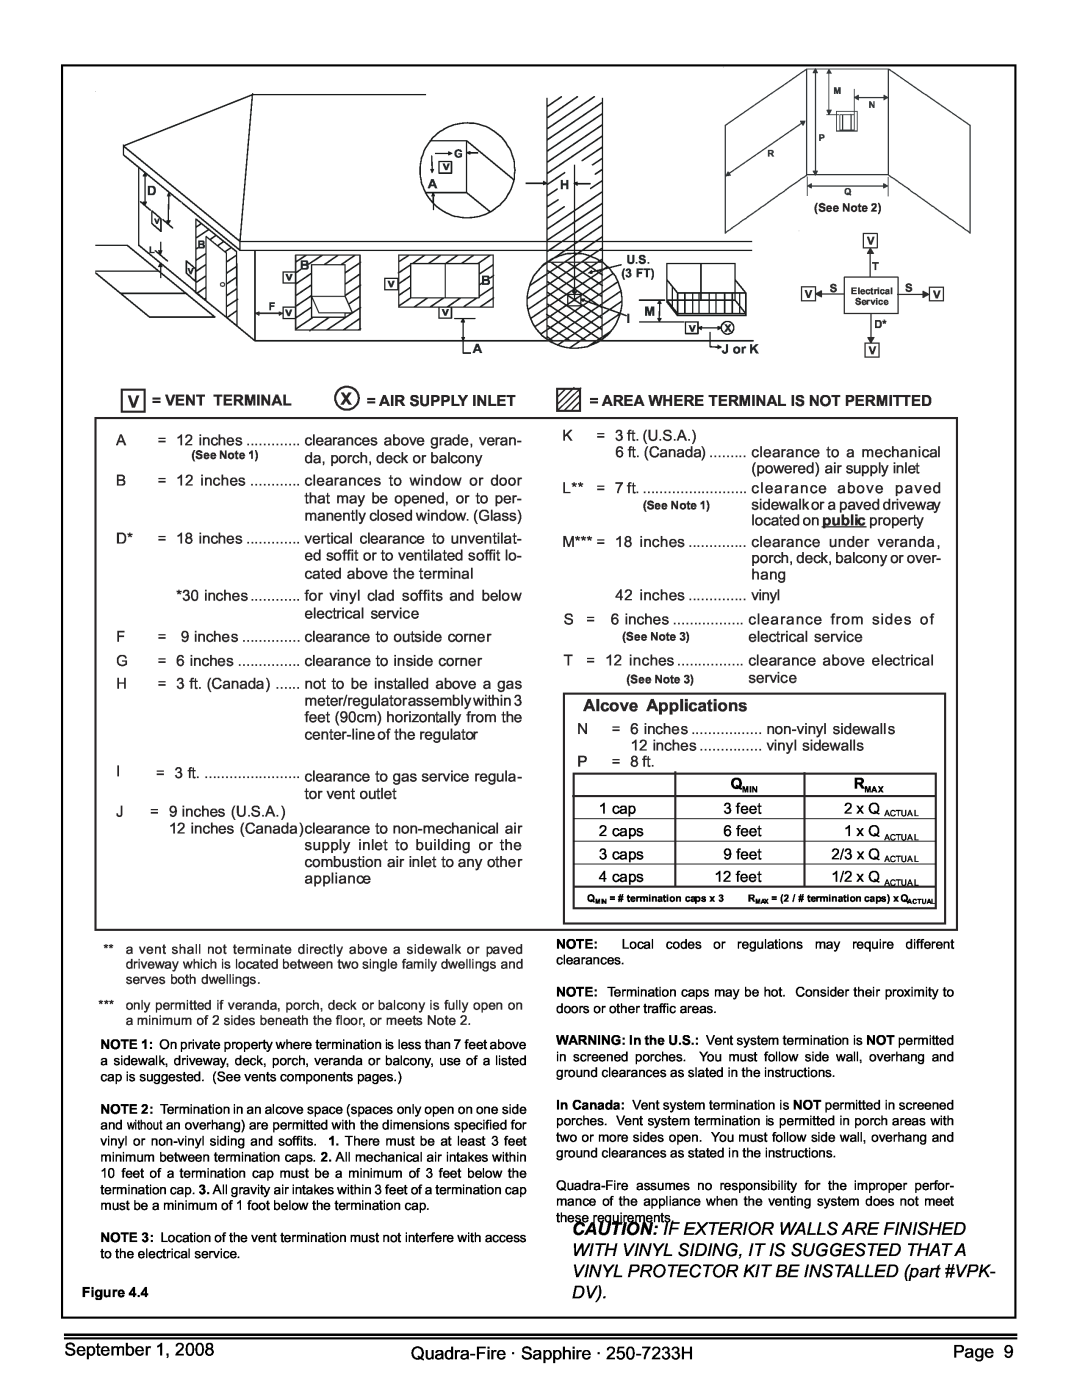 Hearth and Home Technologies SAPPH-D-CSB, 839-1390, 839-1440 Alcove Applications, = Vent Terminal, X = Air Supply Inlet 